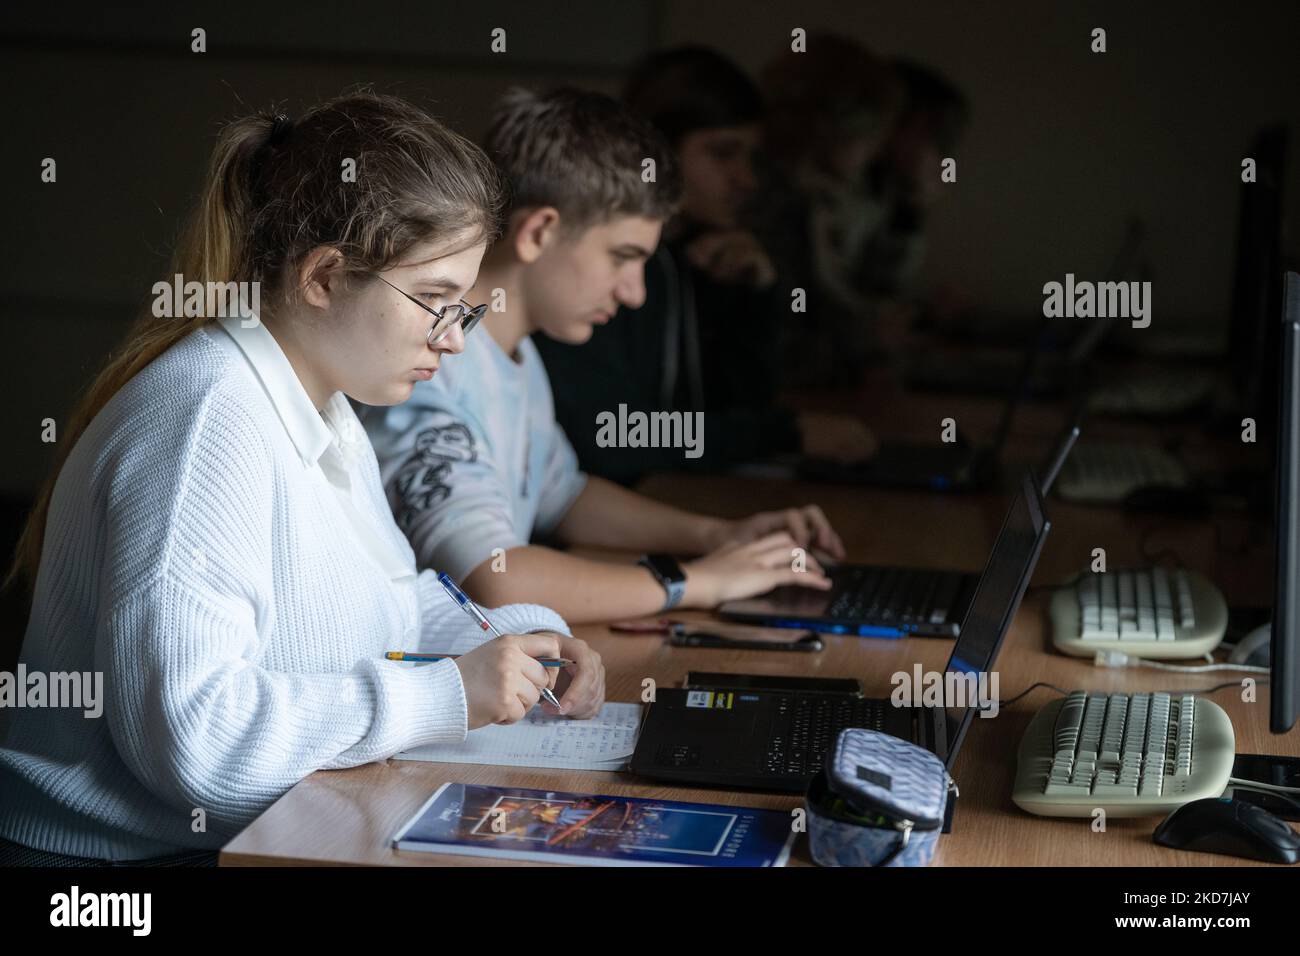 Children from ukraine during remote learning at the Youth Palace, where Warsaw has launched a remote learning facility for young people from Ukraine, in Warsaw, Poland on April 13, 2022 (Photo by Mateusz Wlodarczyk/NurPhoto) Stock Photo